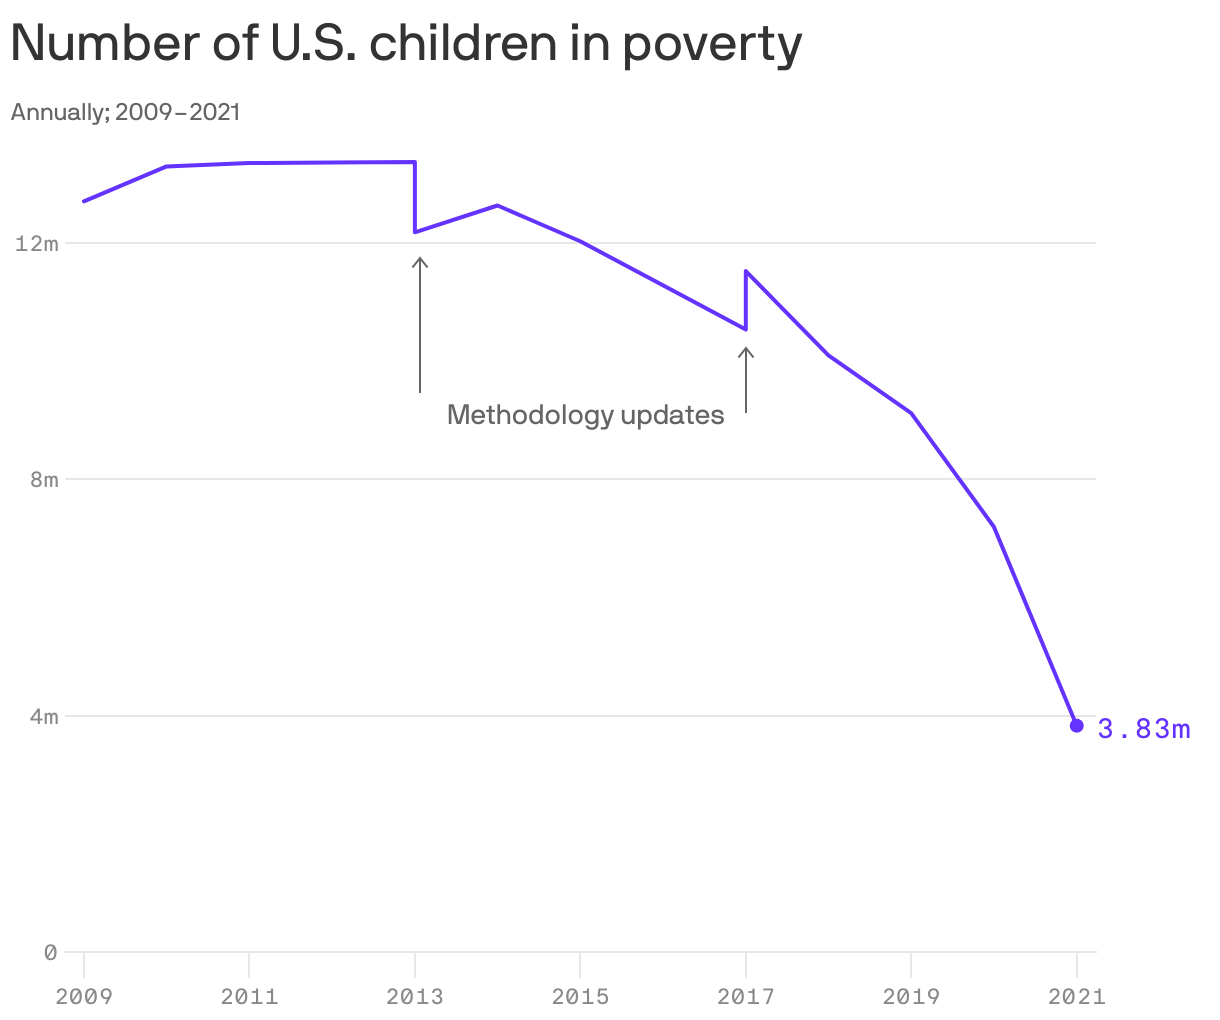 Number of children in poverty